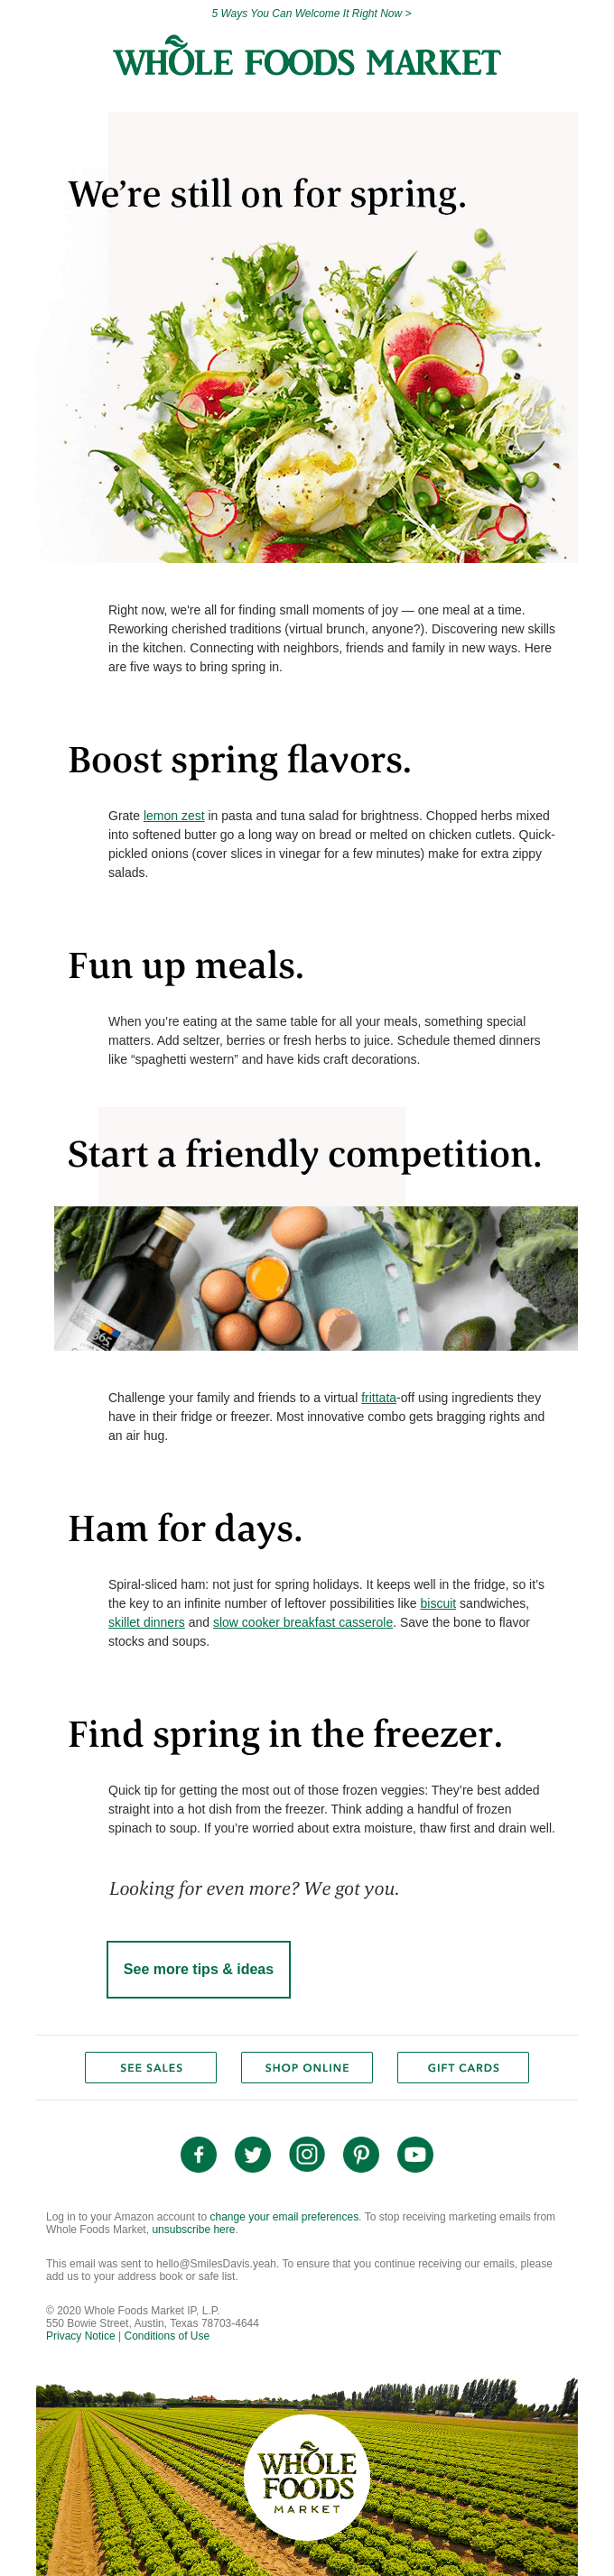 Whole Foods Market- Spring email